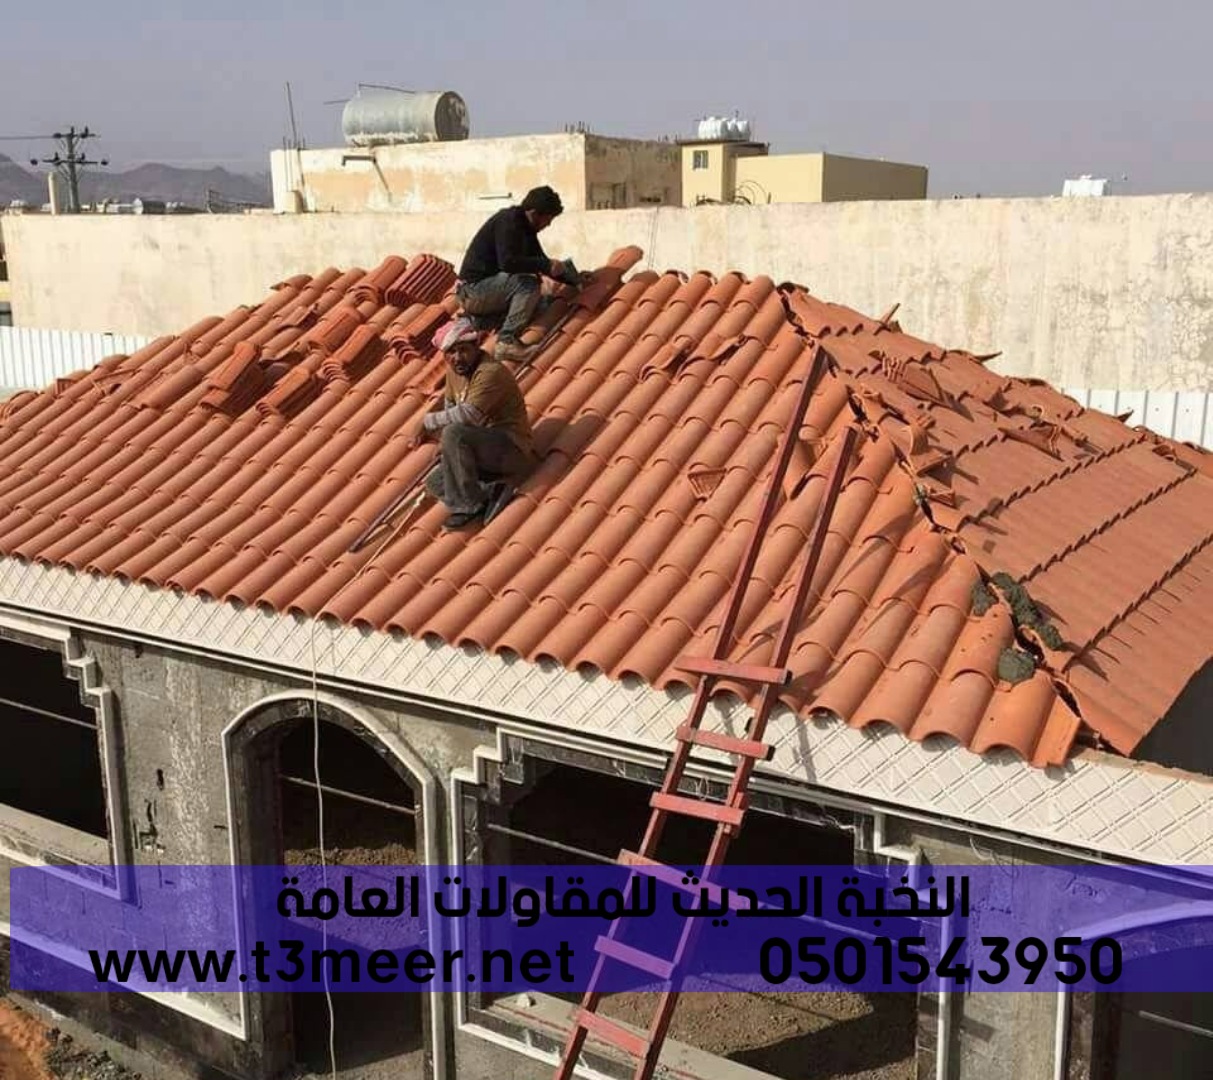 Building an extension of cement board tile roofs, 0501543950